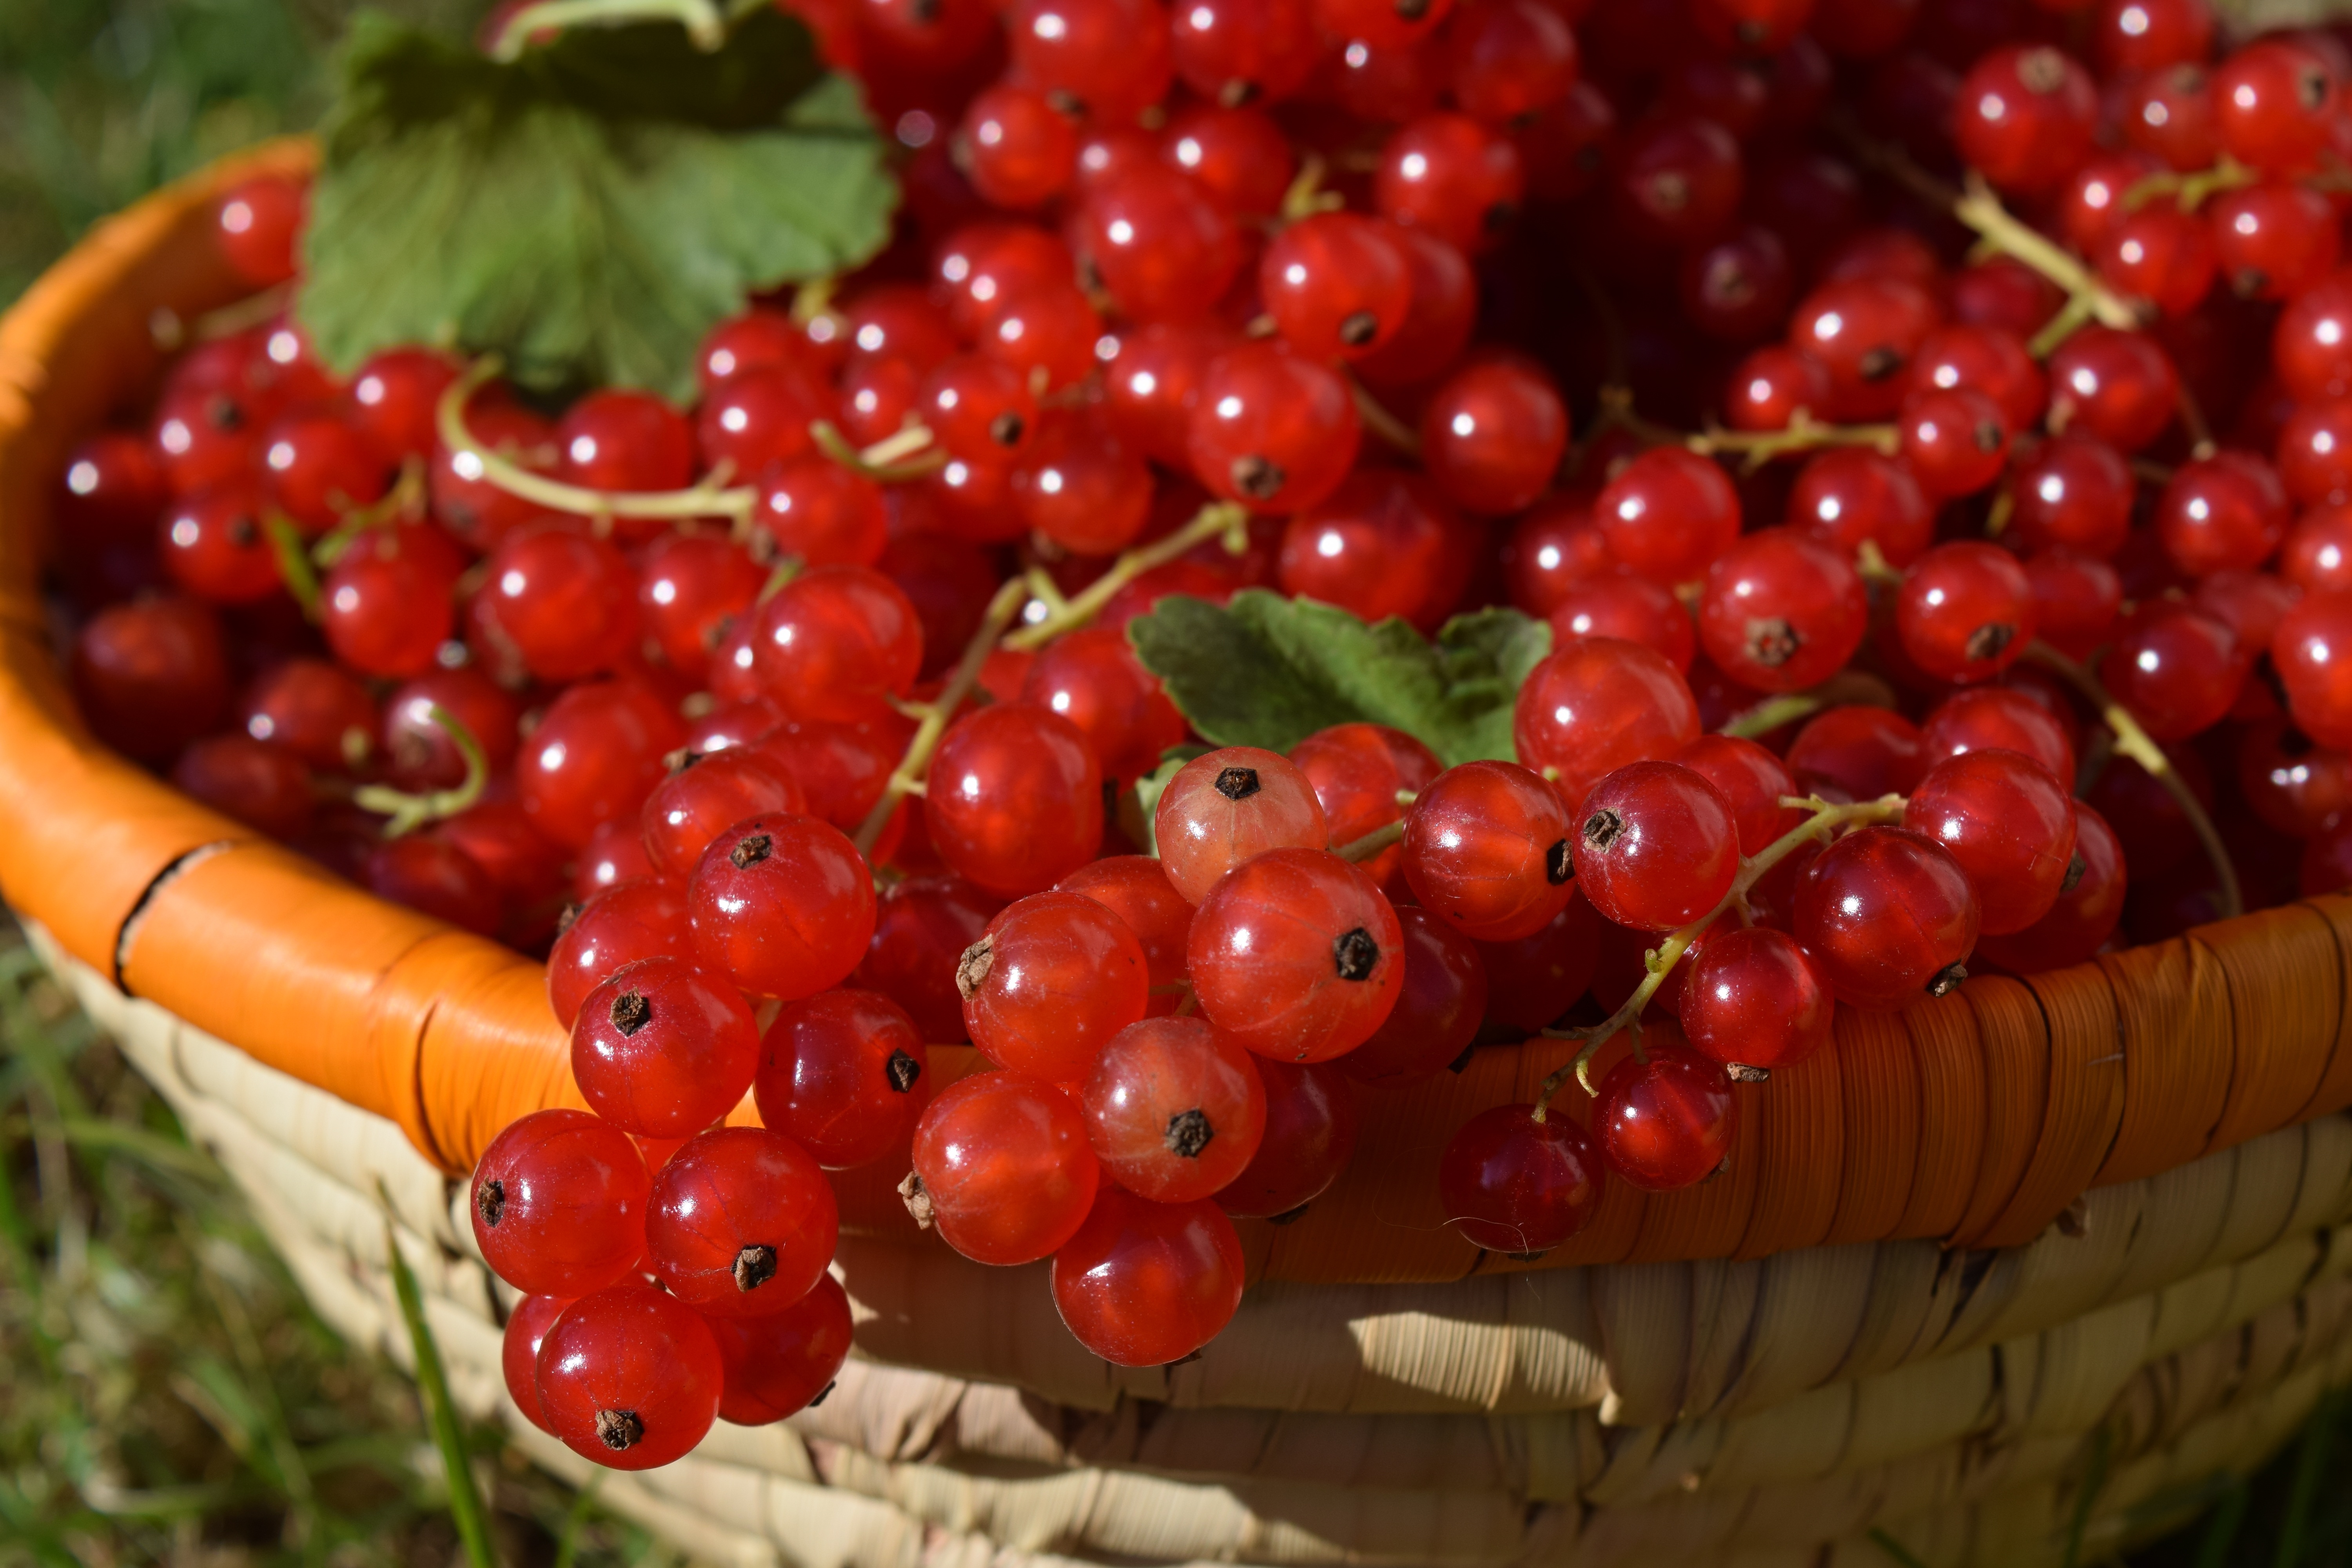 food, berries, currant, basket, ripe, red currants, redcurrant 4K Ultra